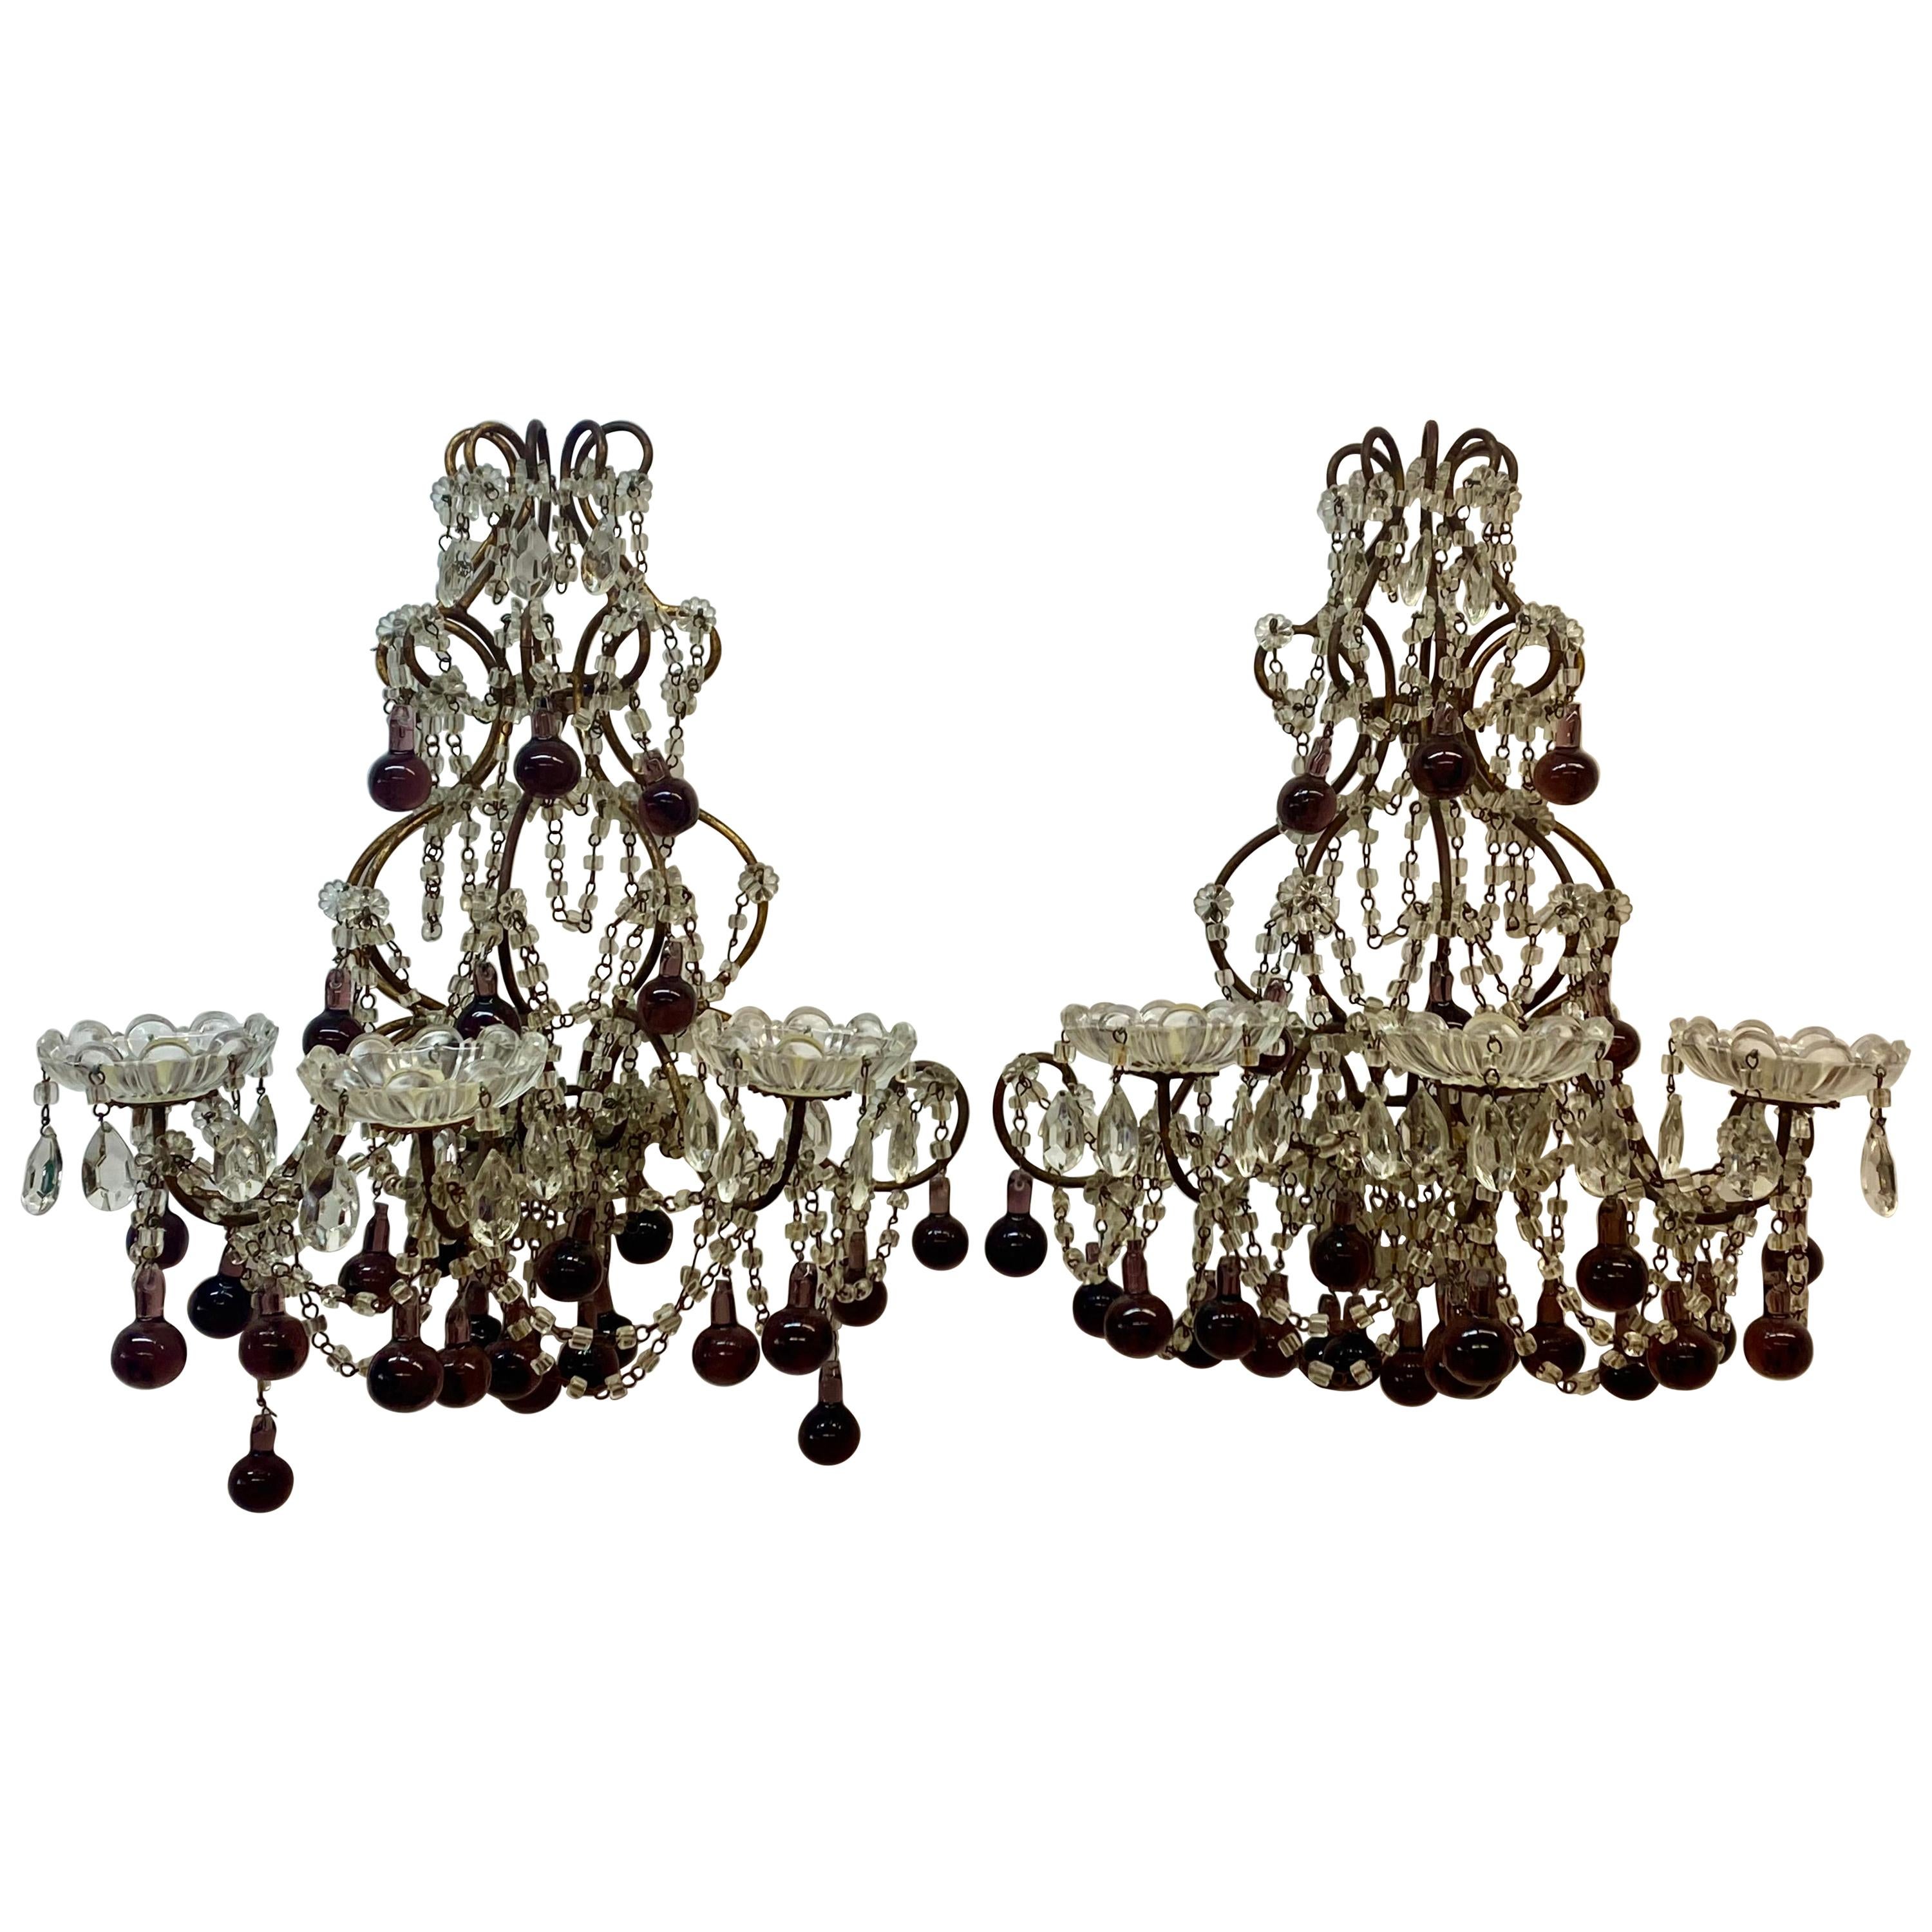 Vintage Wrought Iron, Crystal & Glass Wall Sconces, c.1930